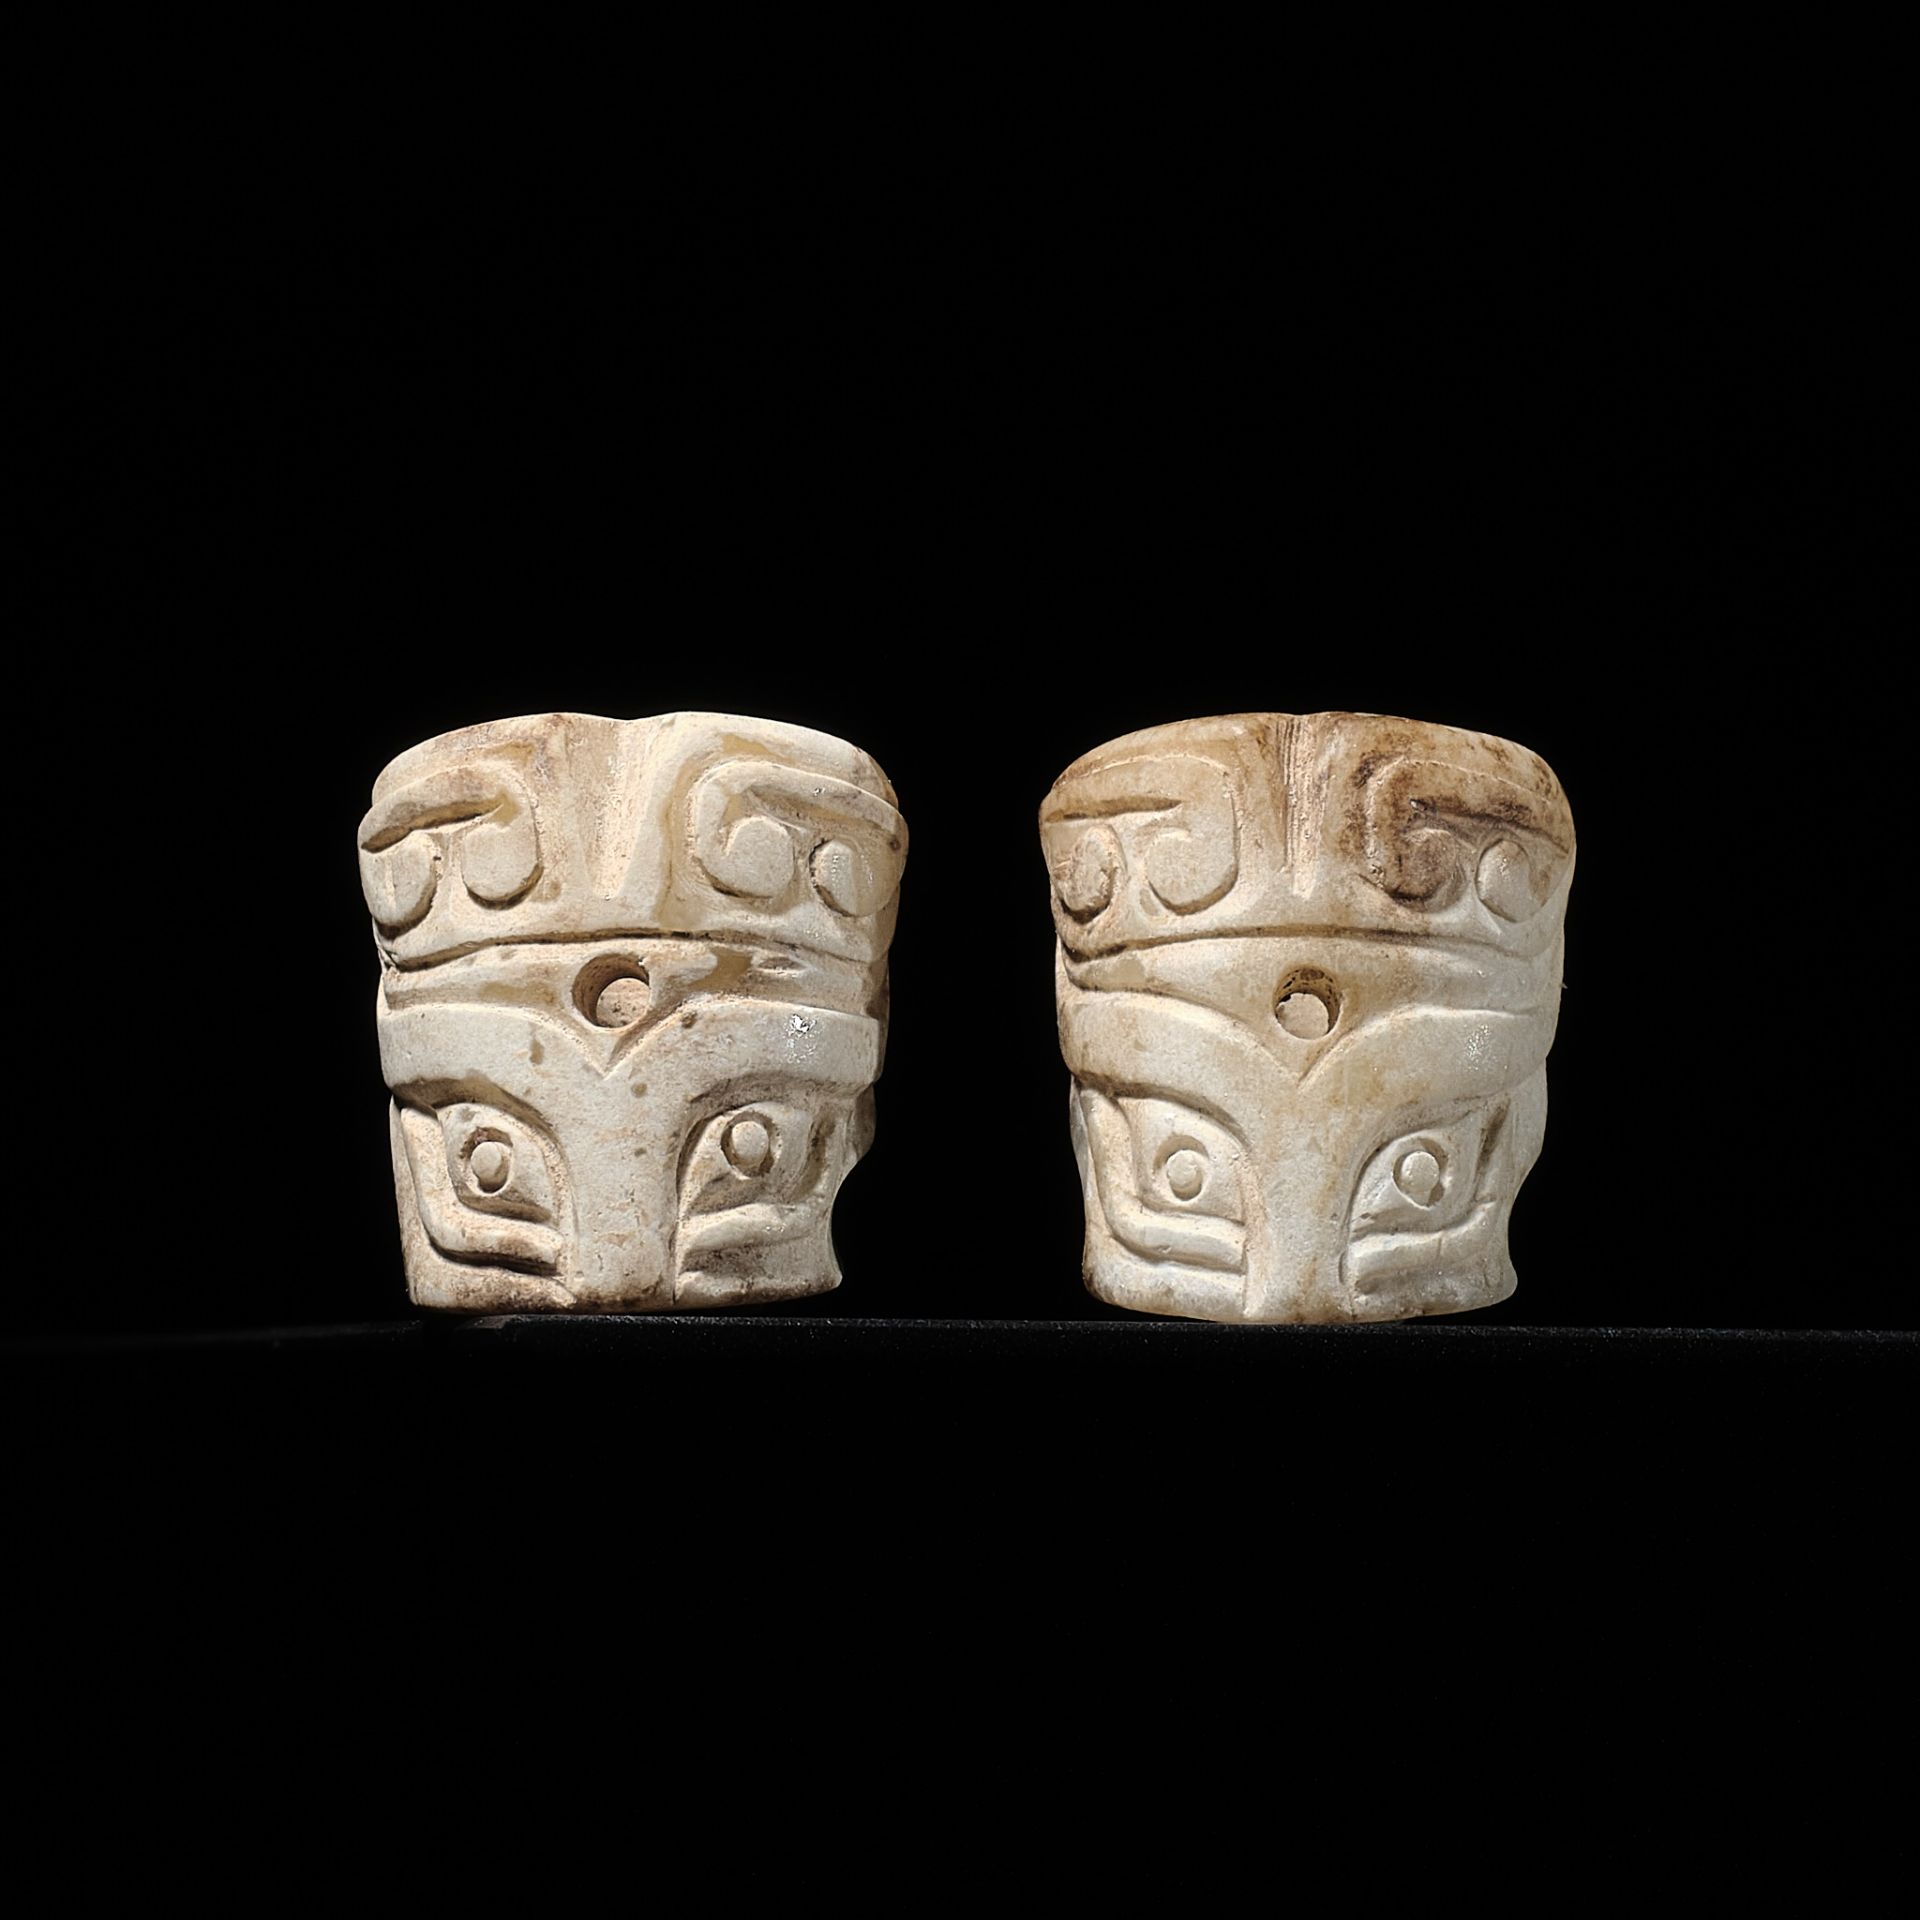 A PAIR OF CYLINDRICAL 'TAOTIE MASK' JADE BEADS, SHANG DYNASTY